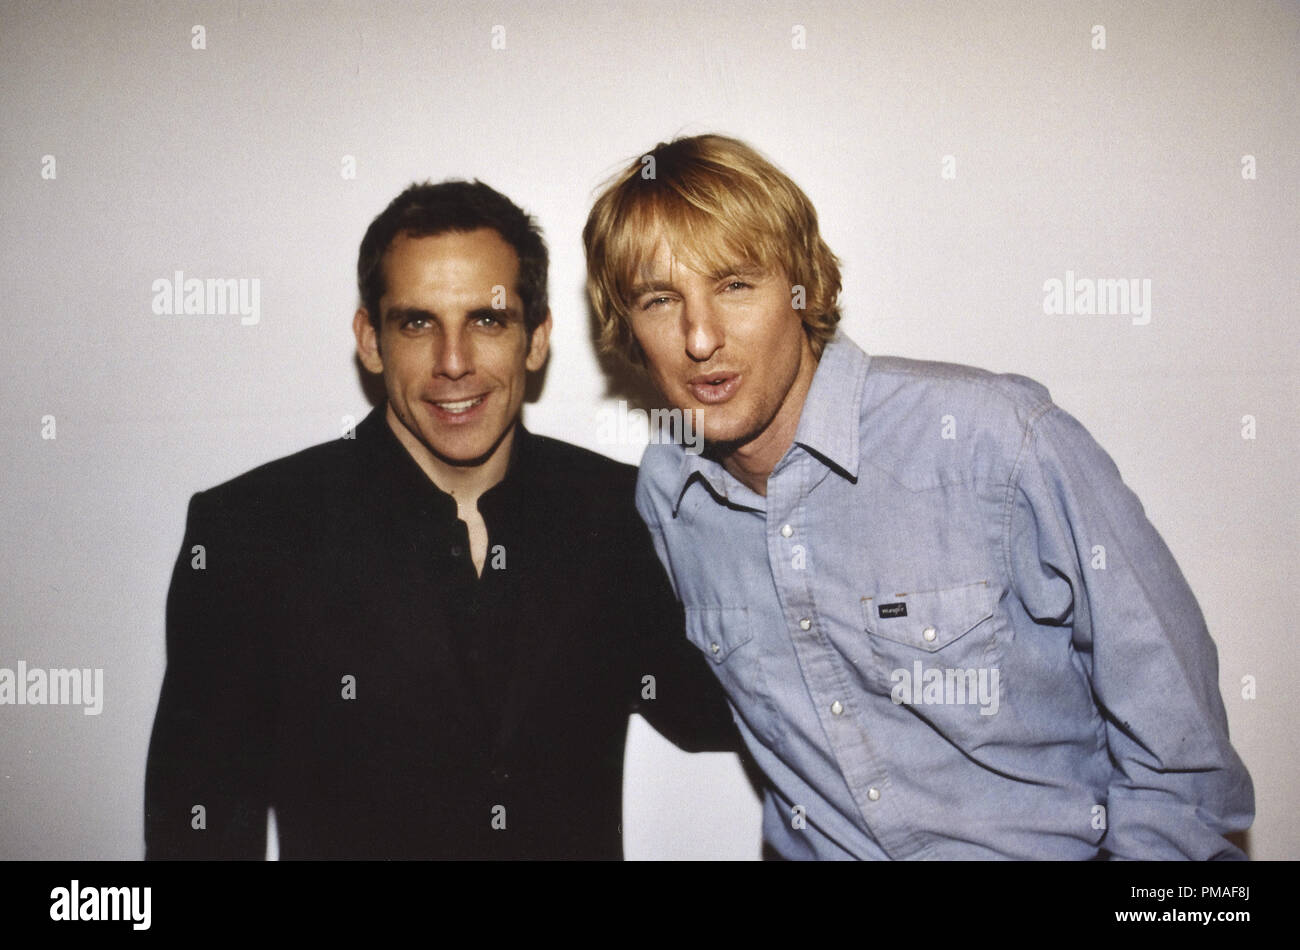 Portrait of Ben Stiller and Owen Wilson, circa 2004 © JRC /The Hollywood Archive - All Rights Reserved  File Reference # 32633 358JRC Stock Photo